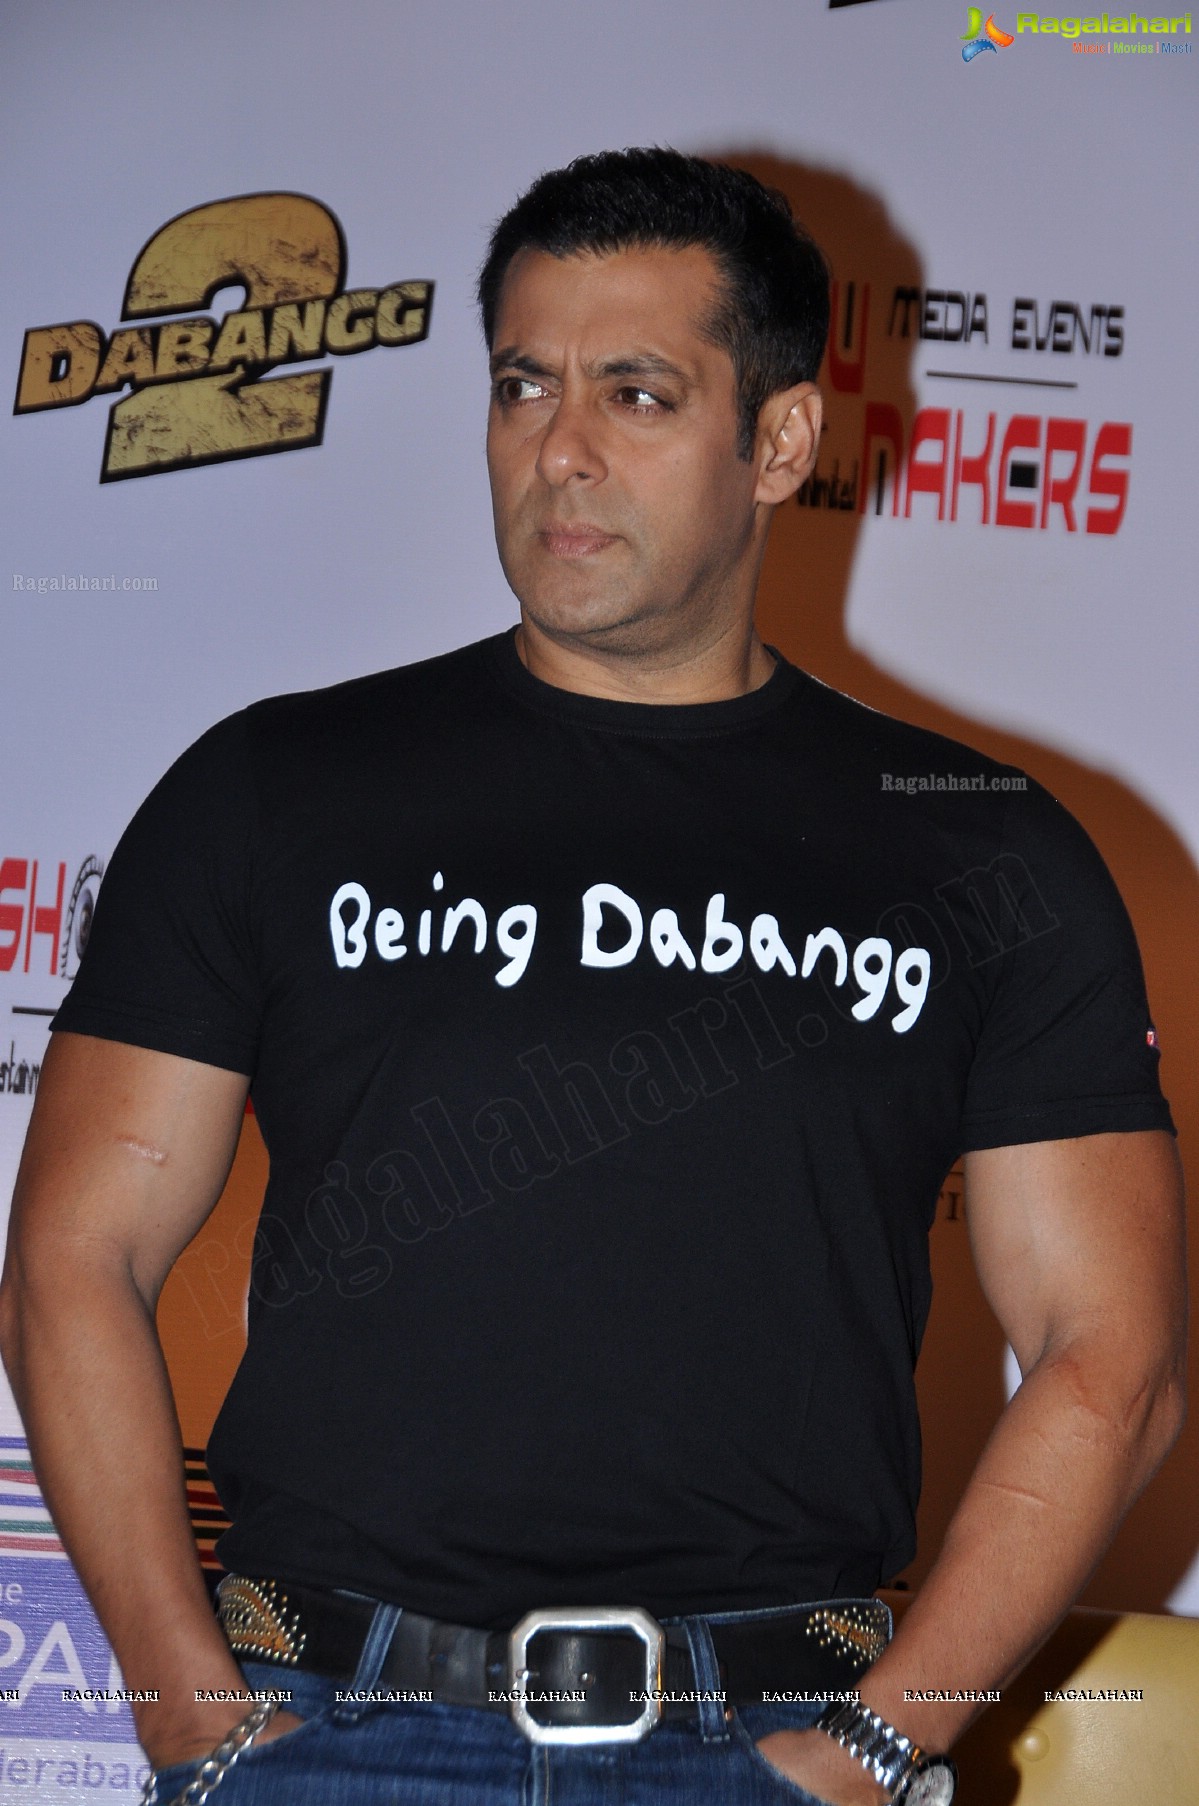 Dabangg 2 Promotions at The Park, Hyderabad